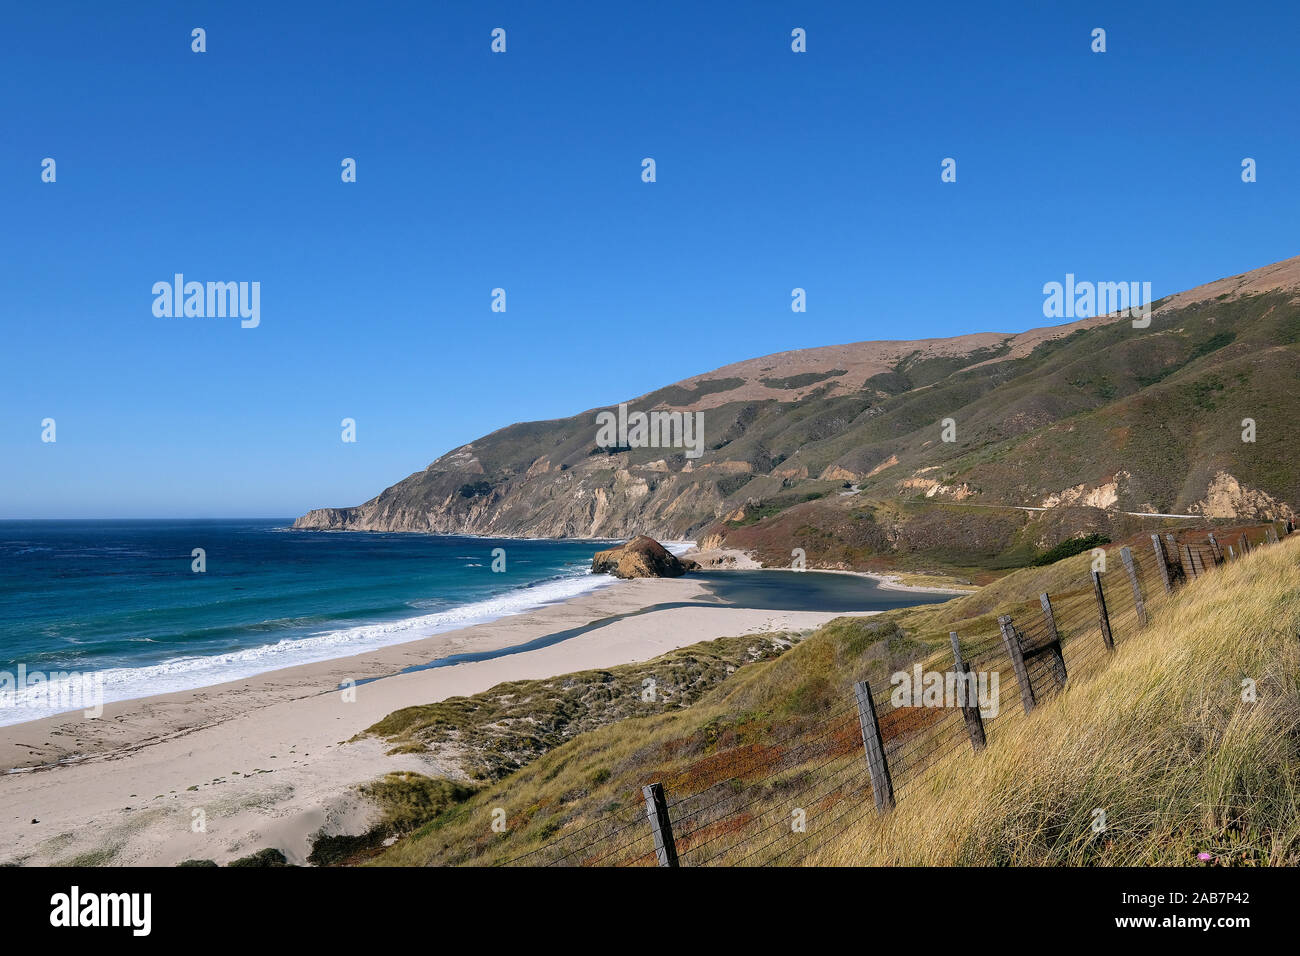 California State Route 1, Highway 1, coastal road along the Pacific Ocean, California, USA Stock Photo